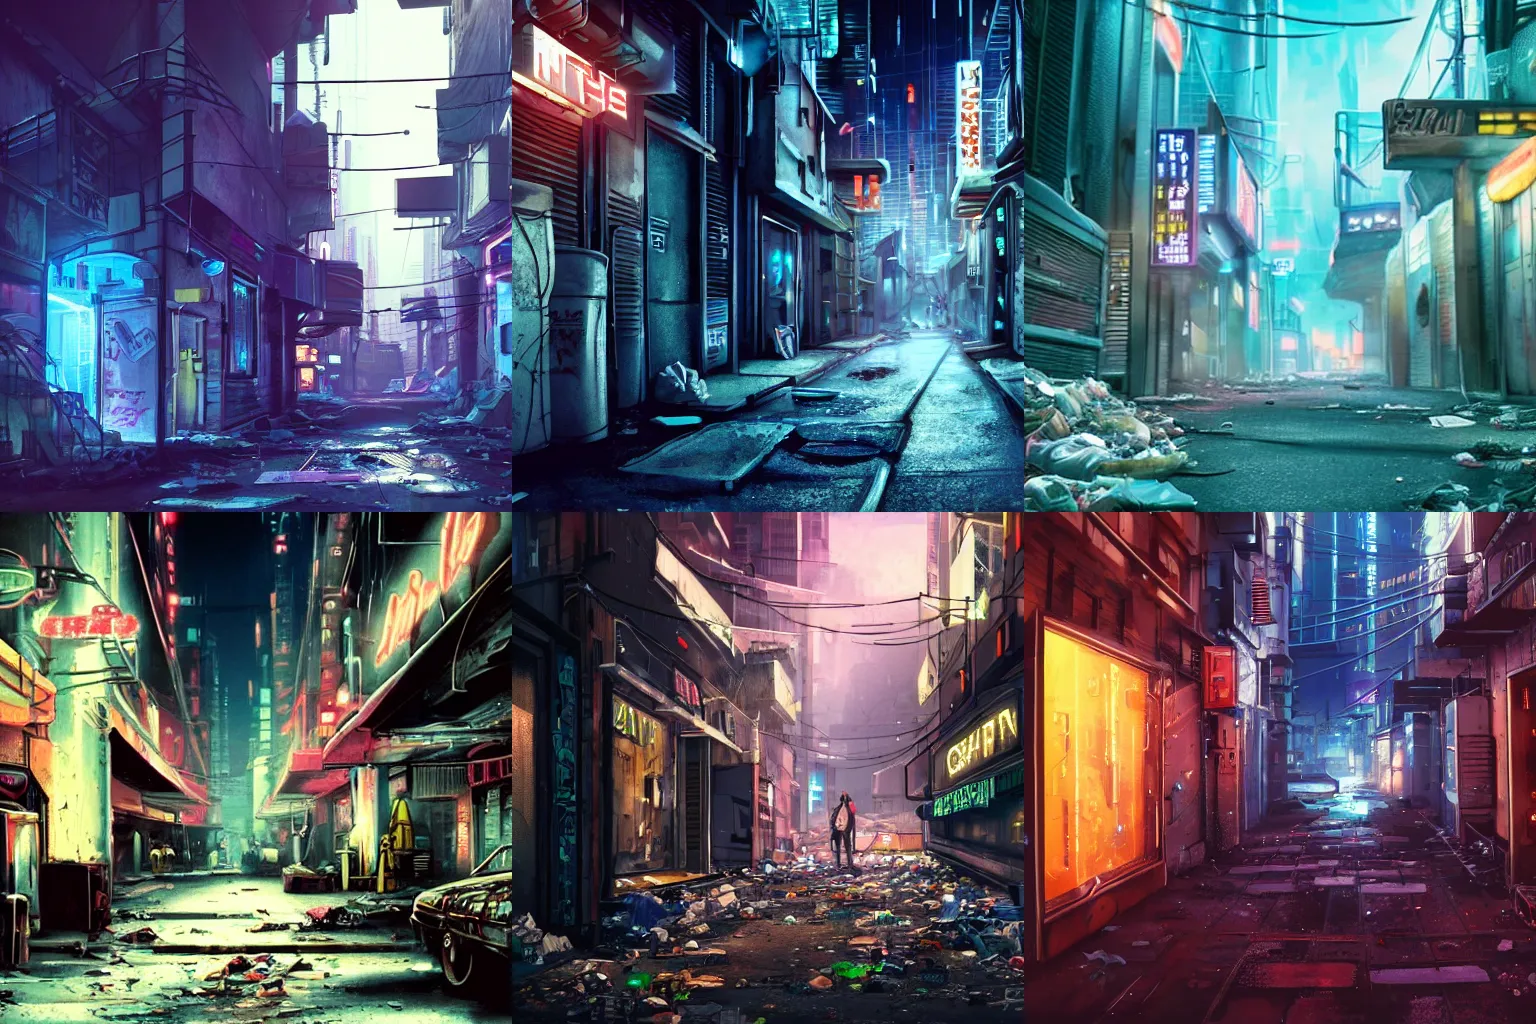 Prompt: a cinematic still frame of an alleyway in a futuristic dystopian city, littered with garbage, cold lighting, neon signs in the background, cityscape, vanishing point perspective